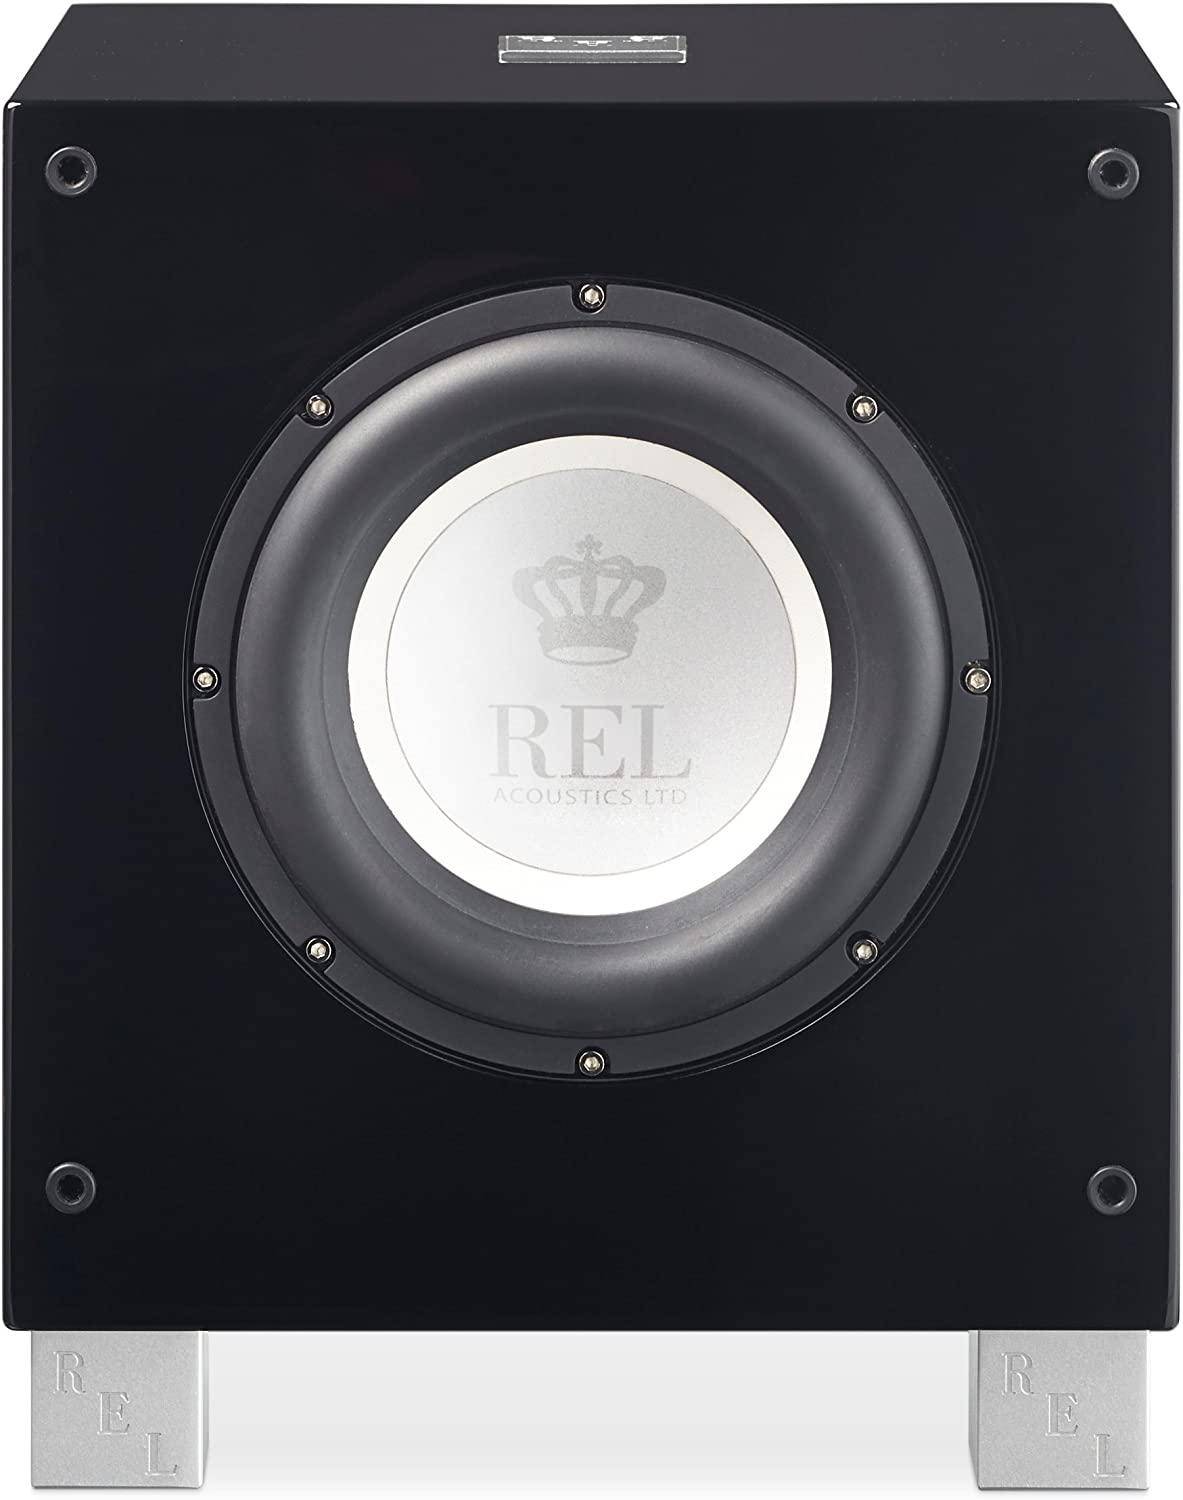 REL Acoustics S/812 Subwoofer with High-End Stereo Systems zoom image